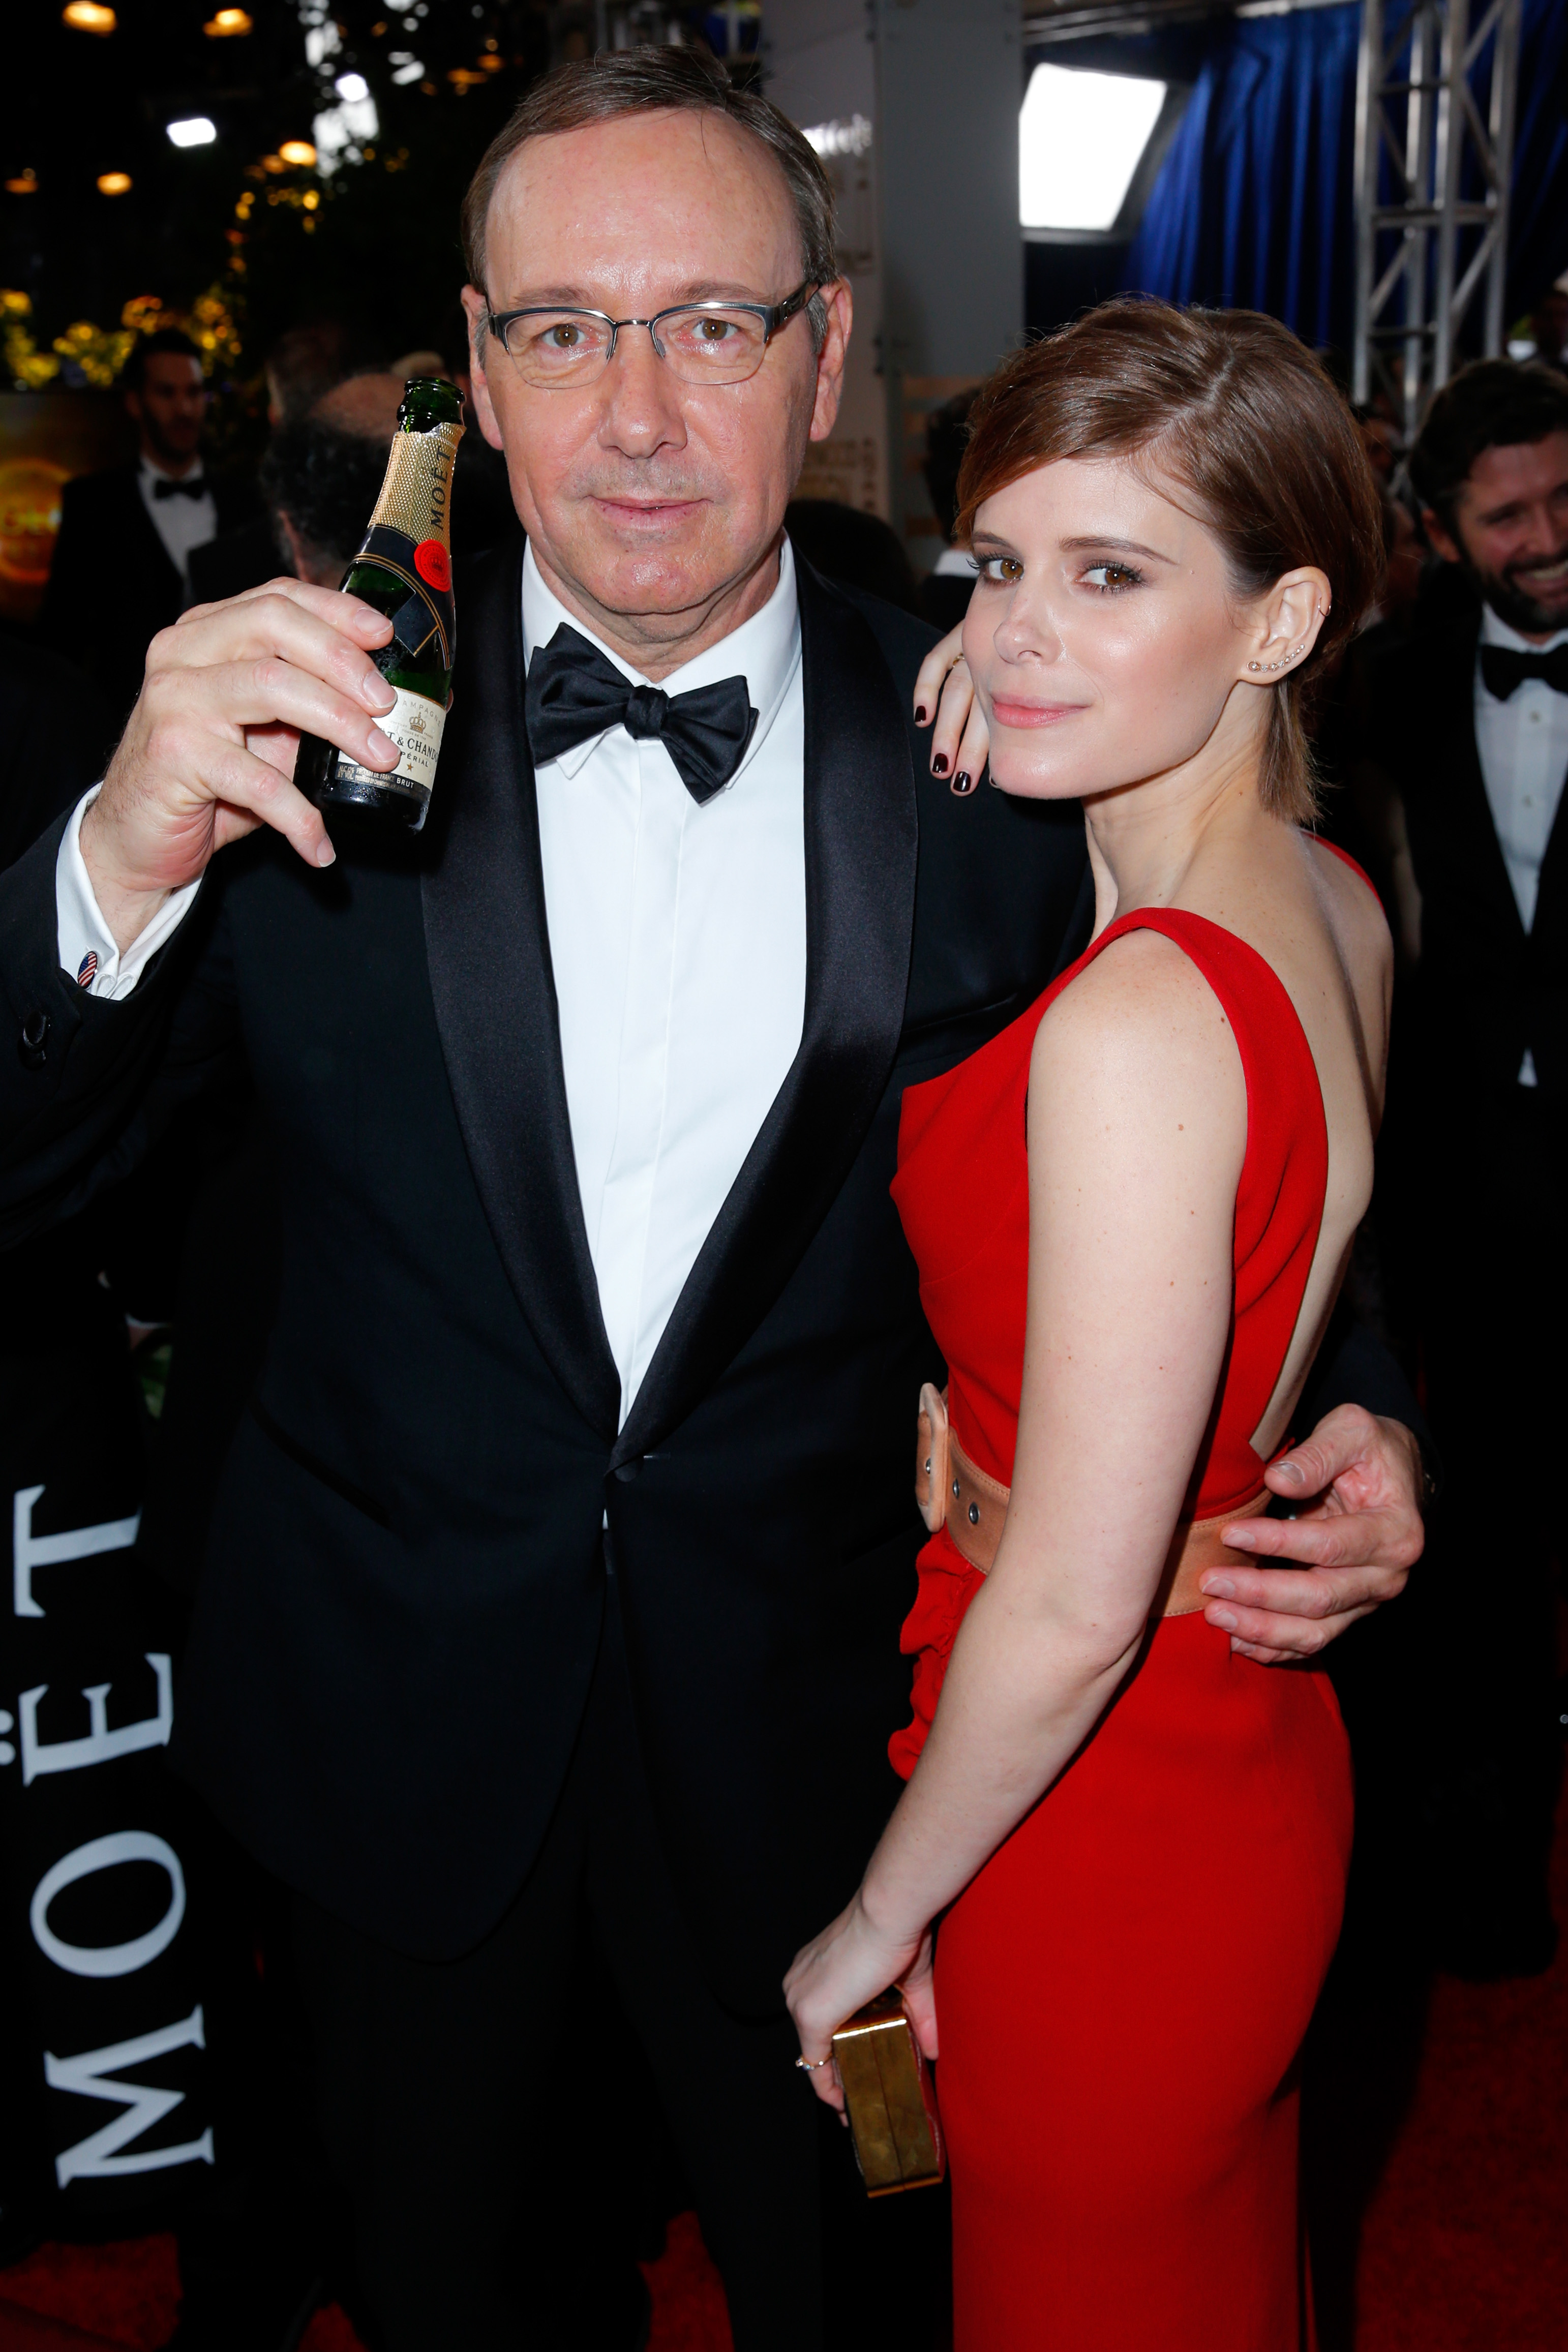 Kevin Spacey & Kate Mara - Moet & Chandon At The 72nd Annual Golden Globe Awards - Red Carpet